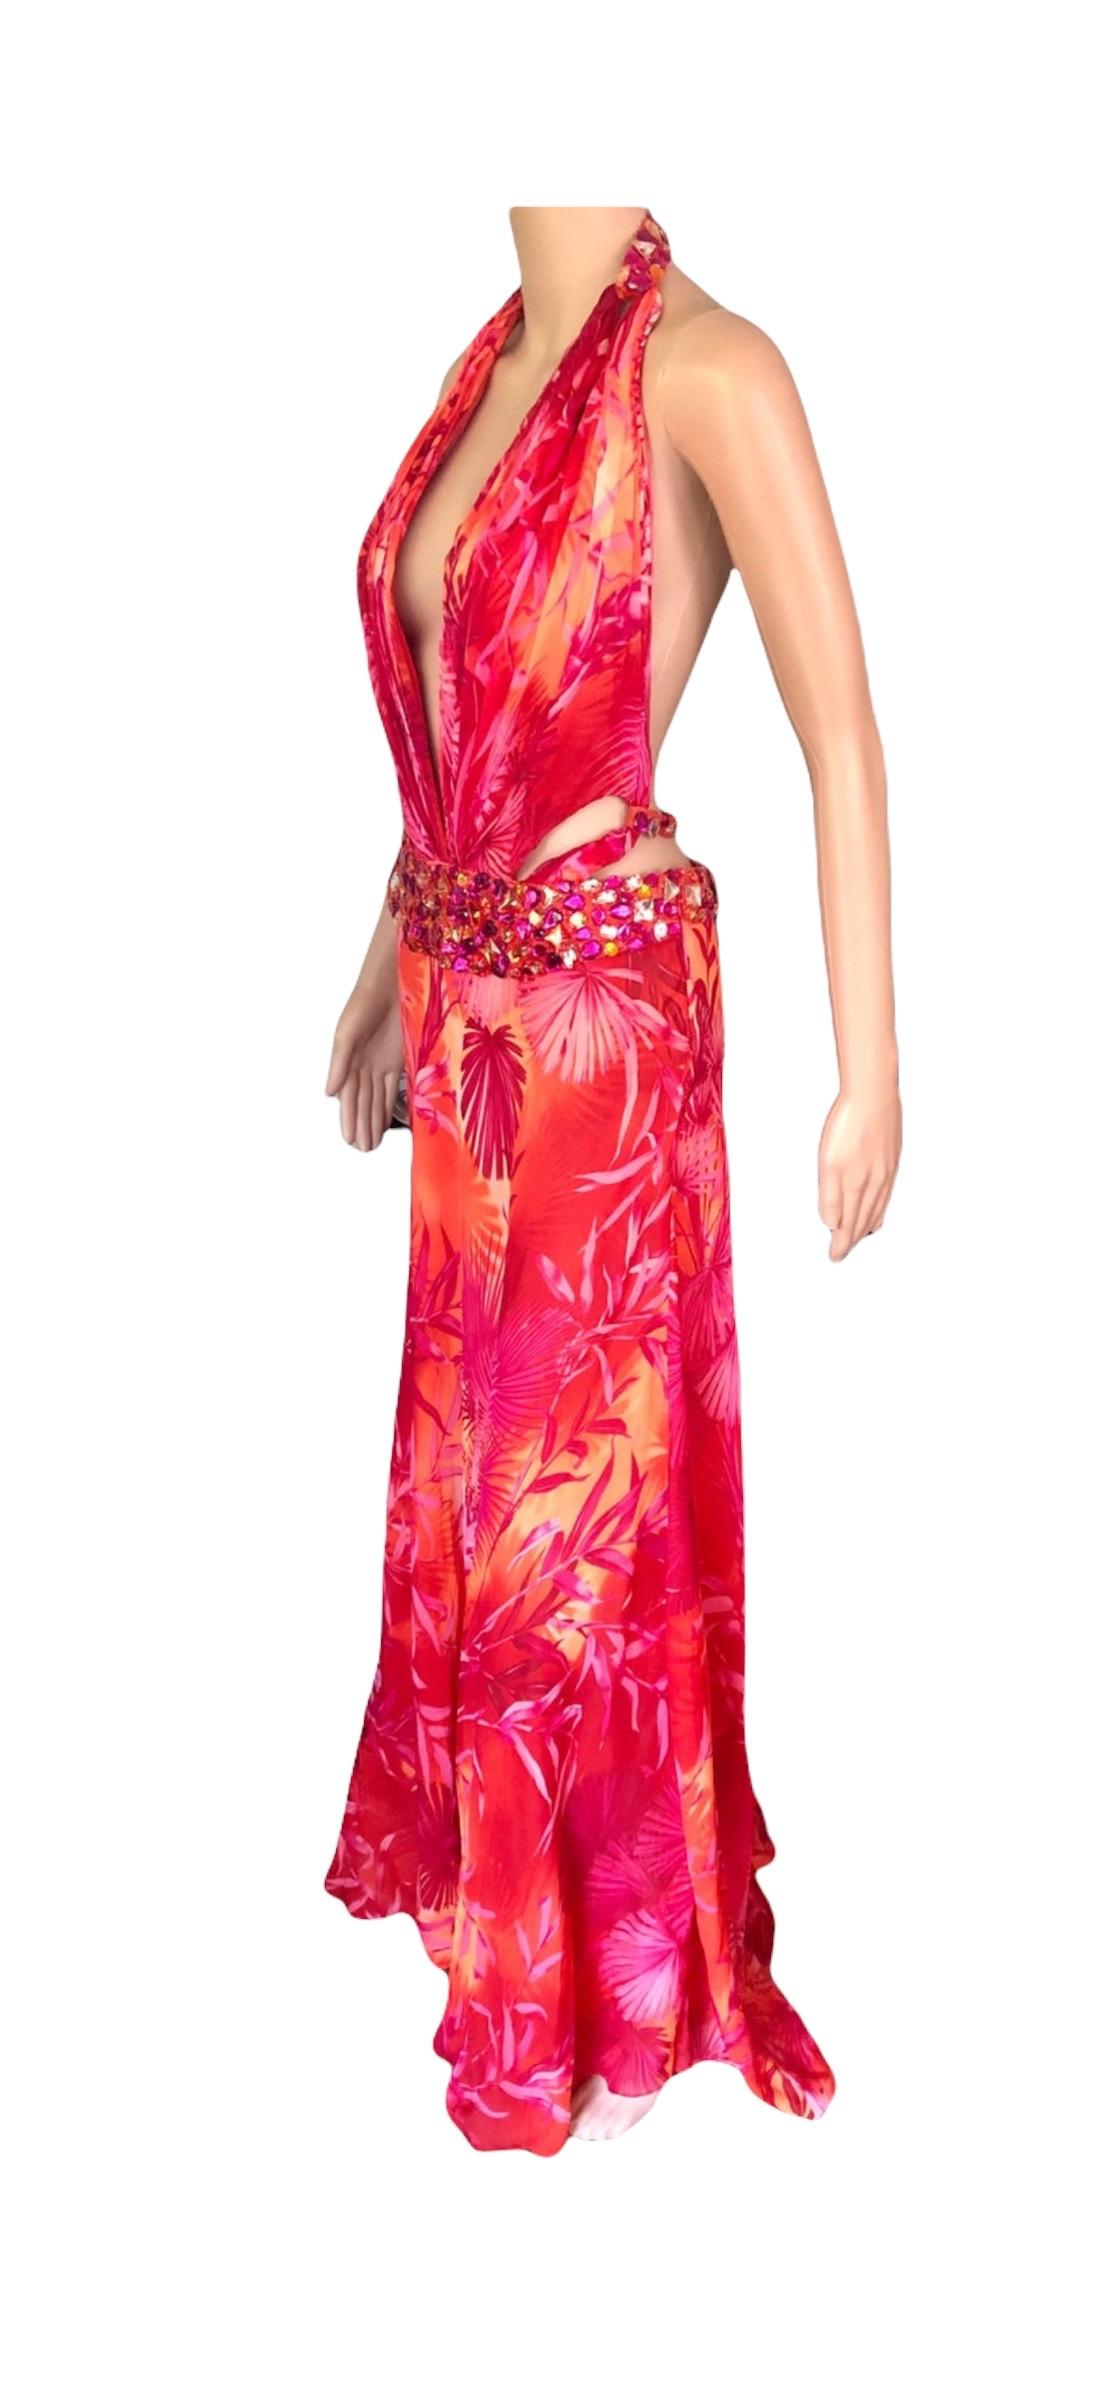 Gianni Versace S/S 2000 Runway Embellished Jungle Print Evening Dress Gown In Good Condition For Sale In Naples, FL